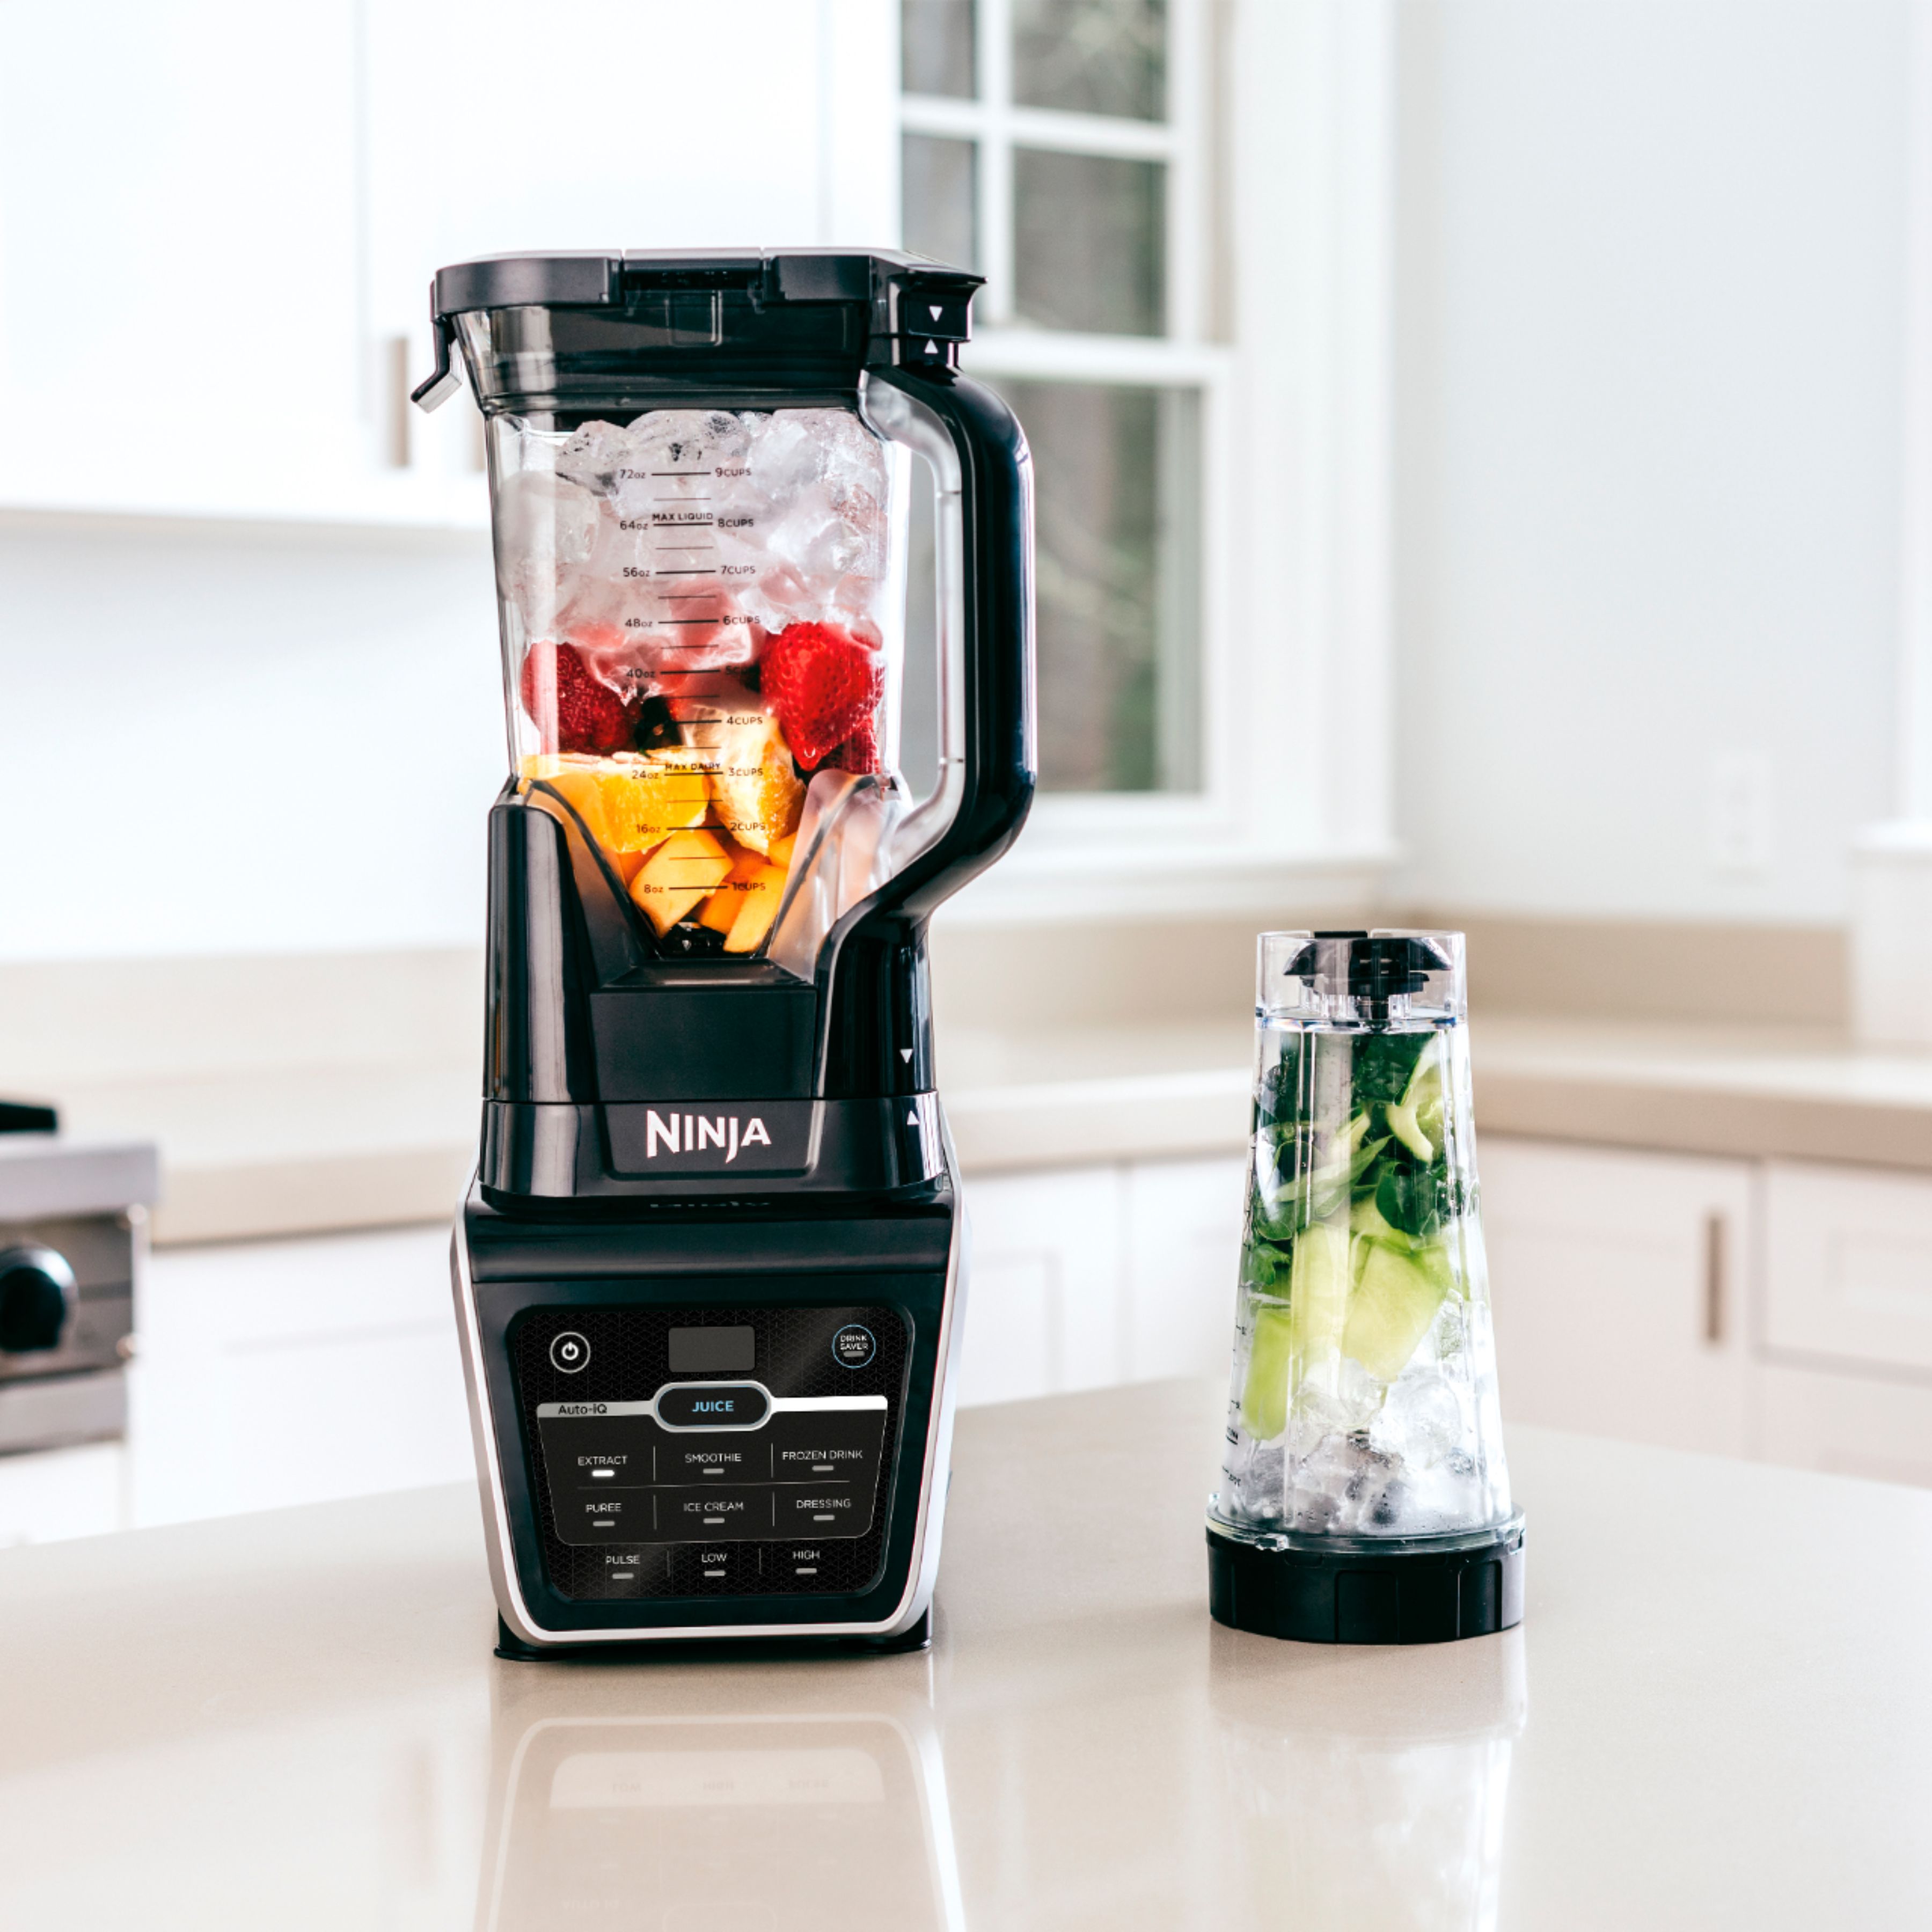 Enter to win a Ninja Chef Duo Blender from Best Buy